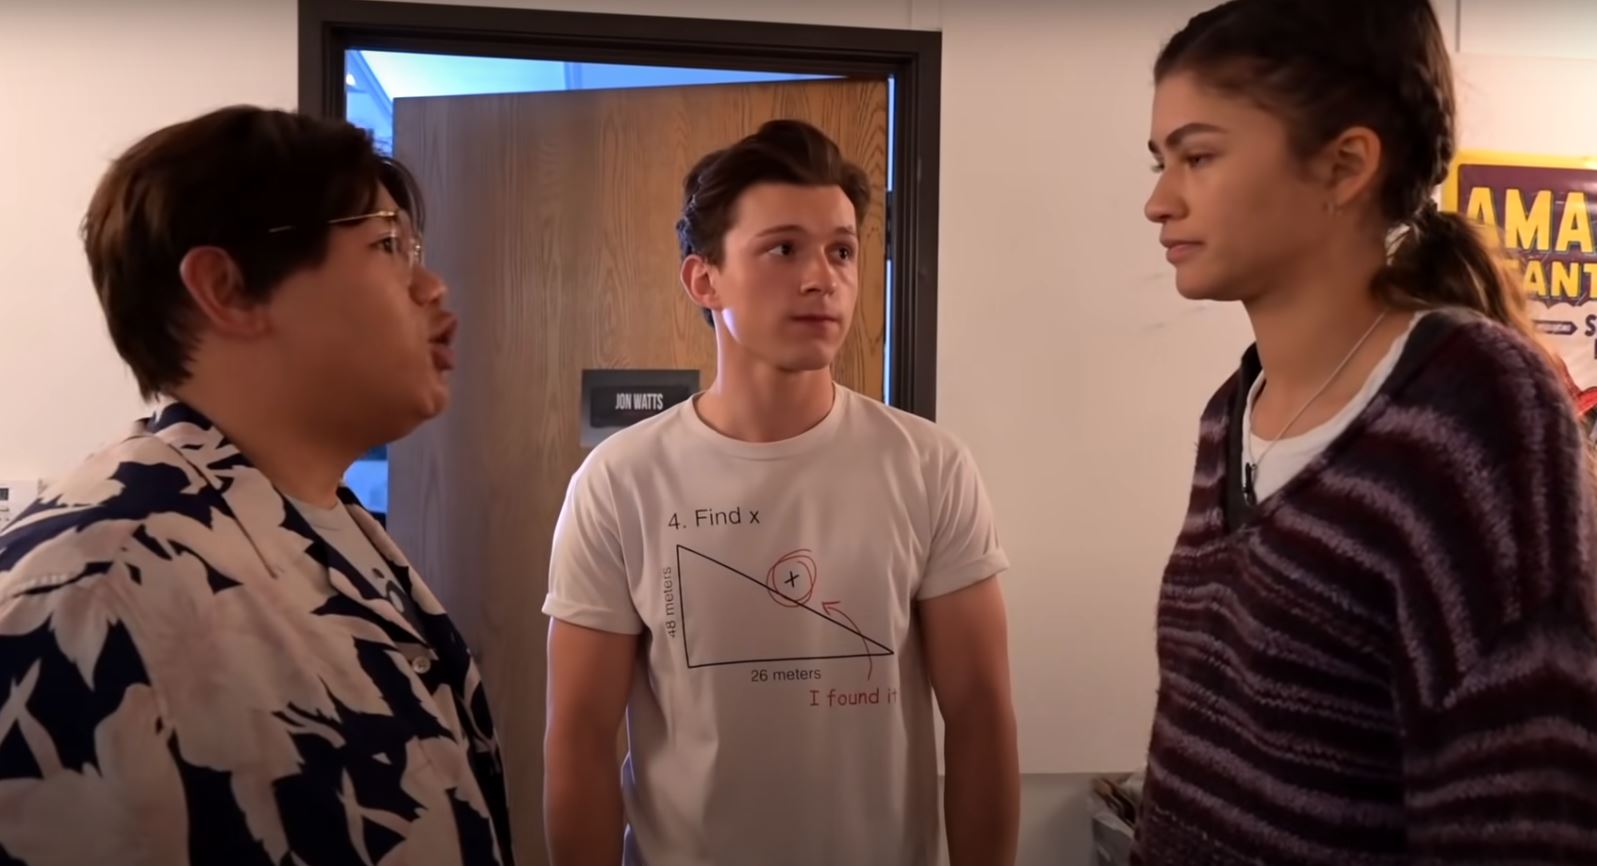 Tom Holland Starrer Spider Man's Next Instalment Is Titled Spider-Man: No Way Home; Makers Announce It With A Hilarious Video